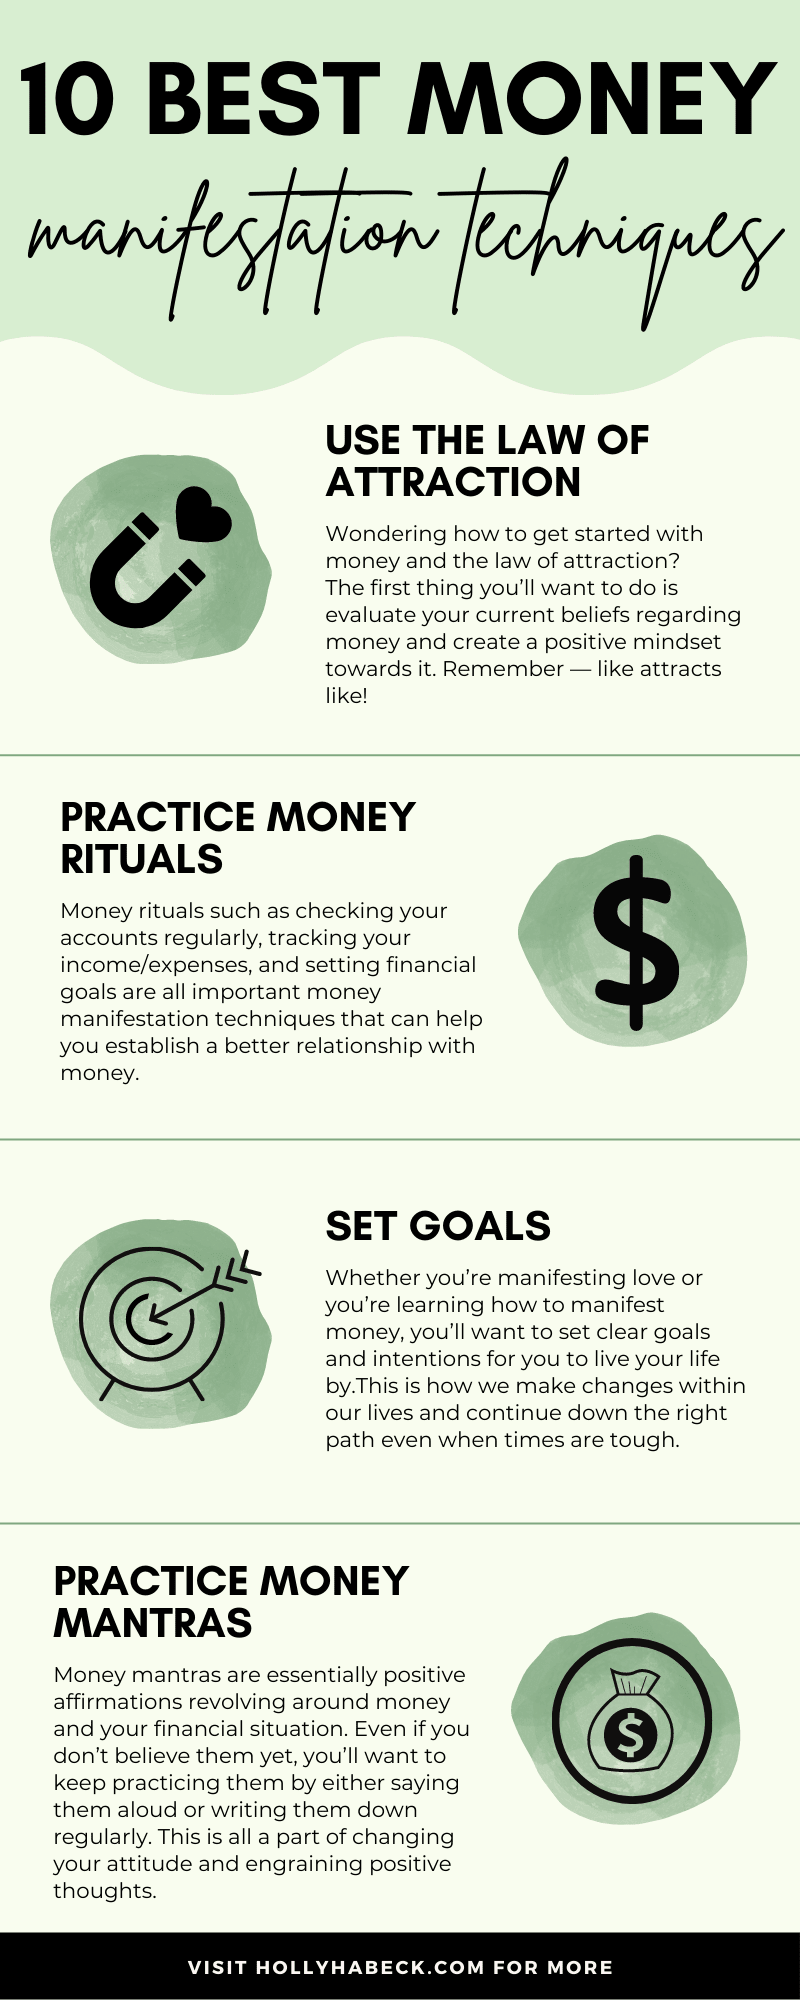 How To Manifest More Money?